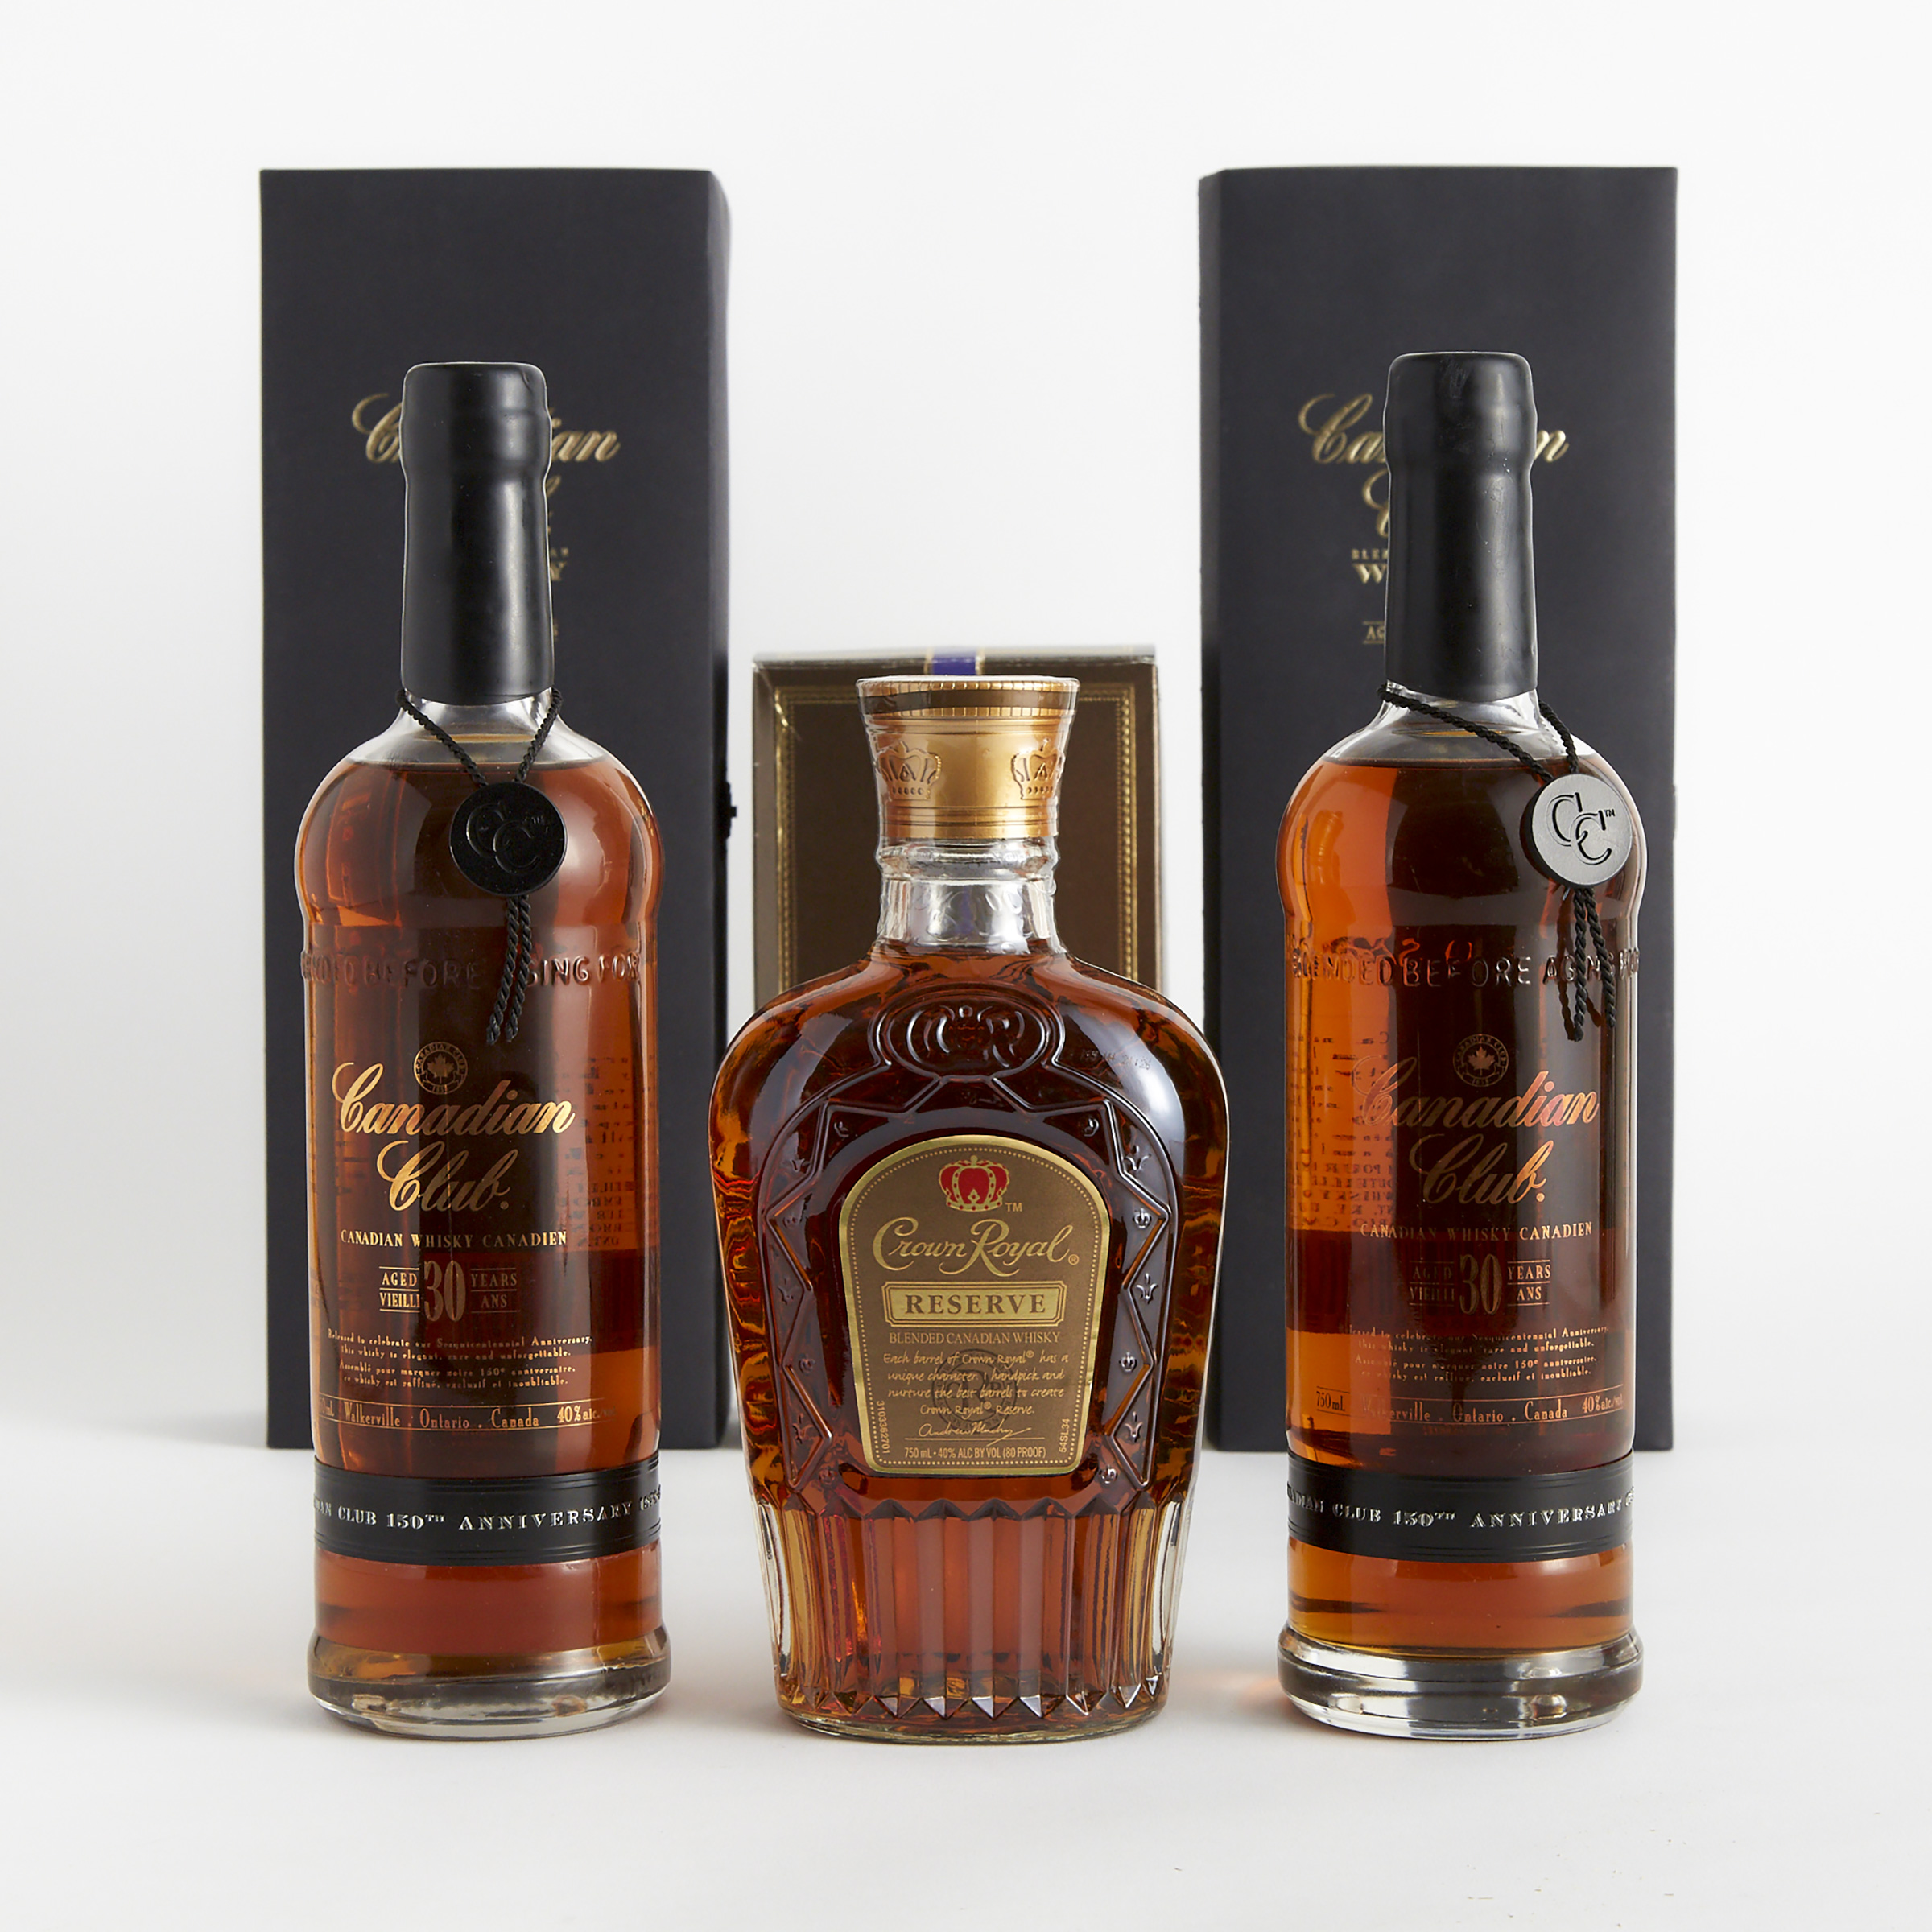 CANADIAN CLUB BLENDED CANADIAN WHISKY 30 YEARS (TWO 750 ML)
CROWN ROYAL RESERVE BLENDED CANADIAN WHISKEY NAS (ONE  750 ML)